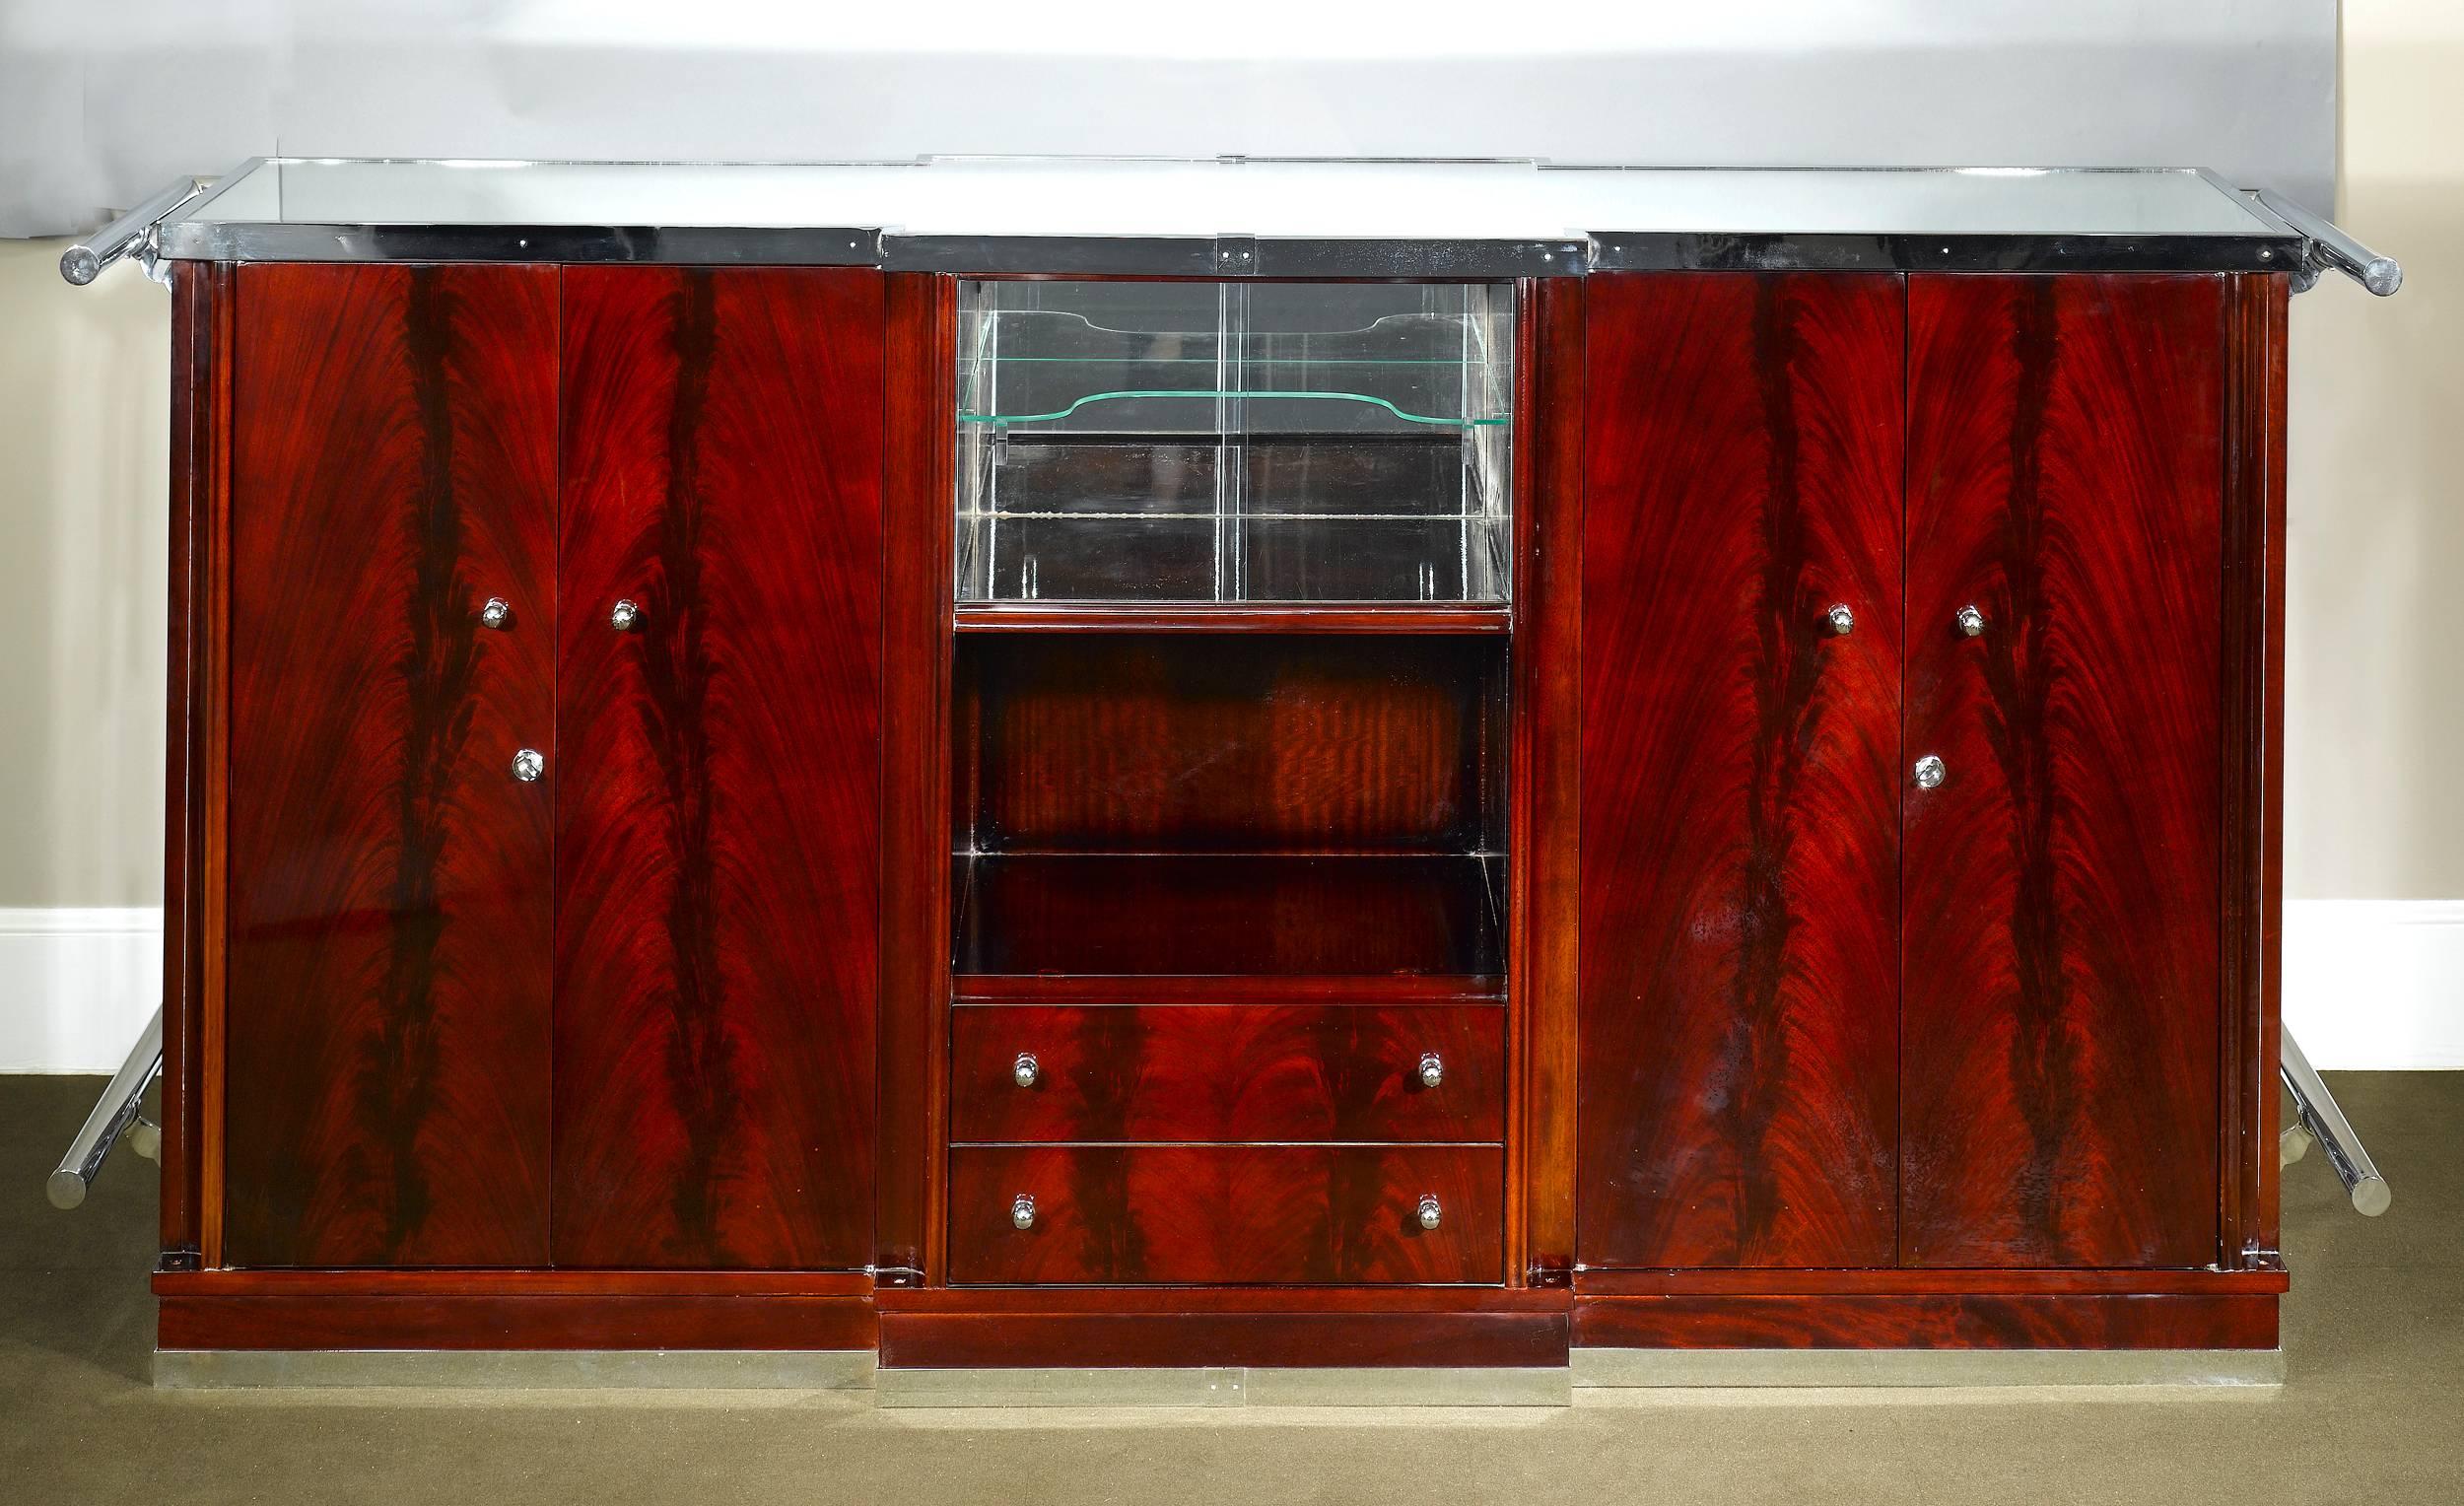 Rare beautiful and stylish Parisian Art Deco period mahogany and chrome free standing bar with chrome inlay and a mirrored top, in excellent condition - comes with four later Art Deco style bar stools.